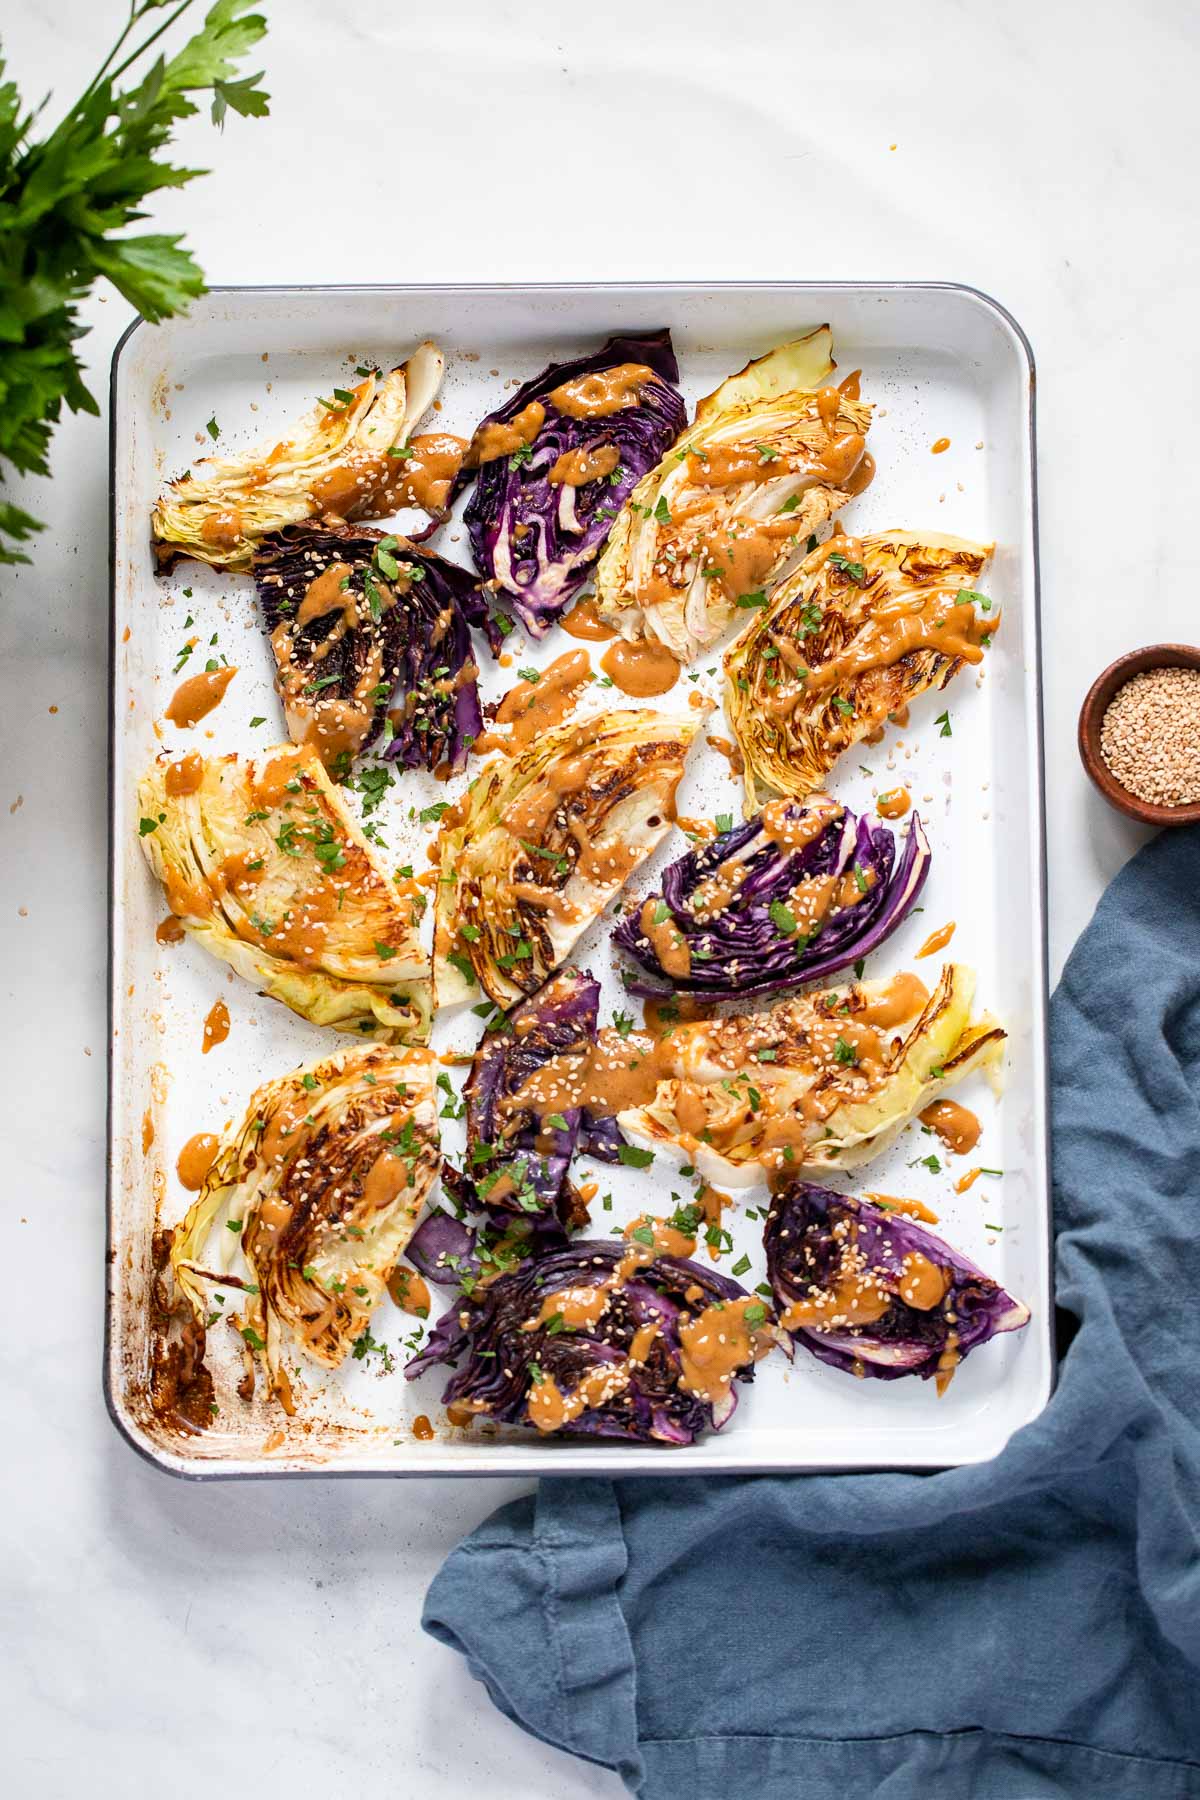 Oven Roasted Cabbage with Tahini Miso Sauce